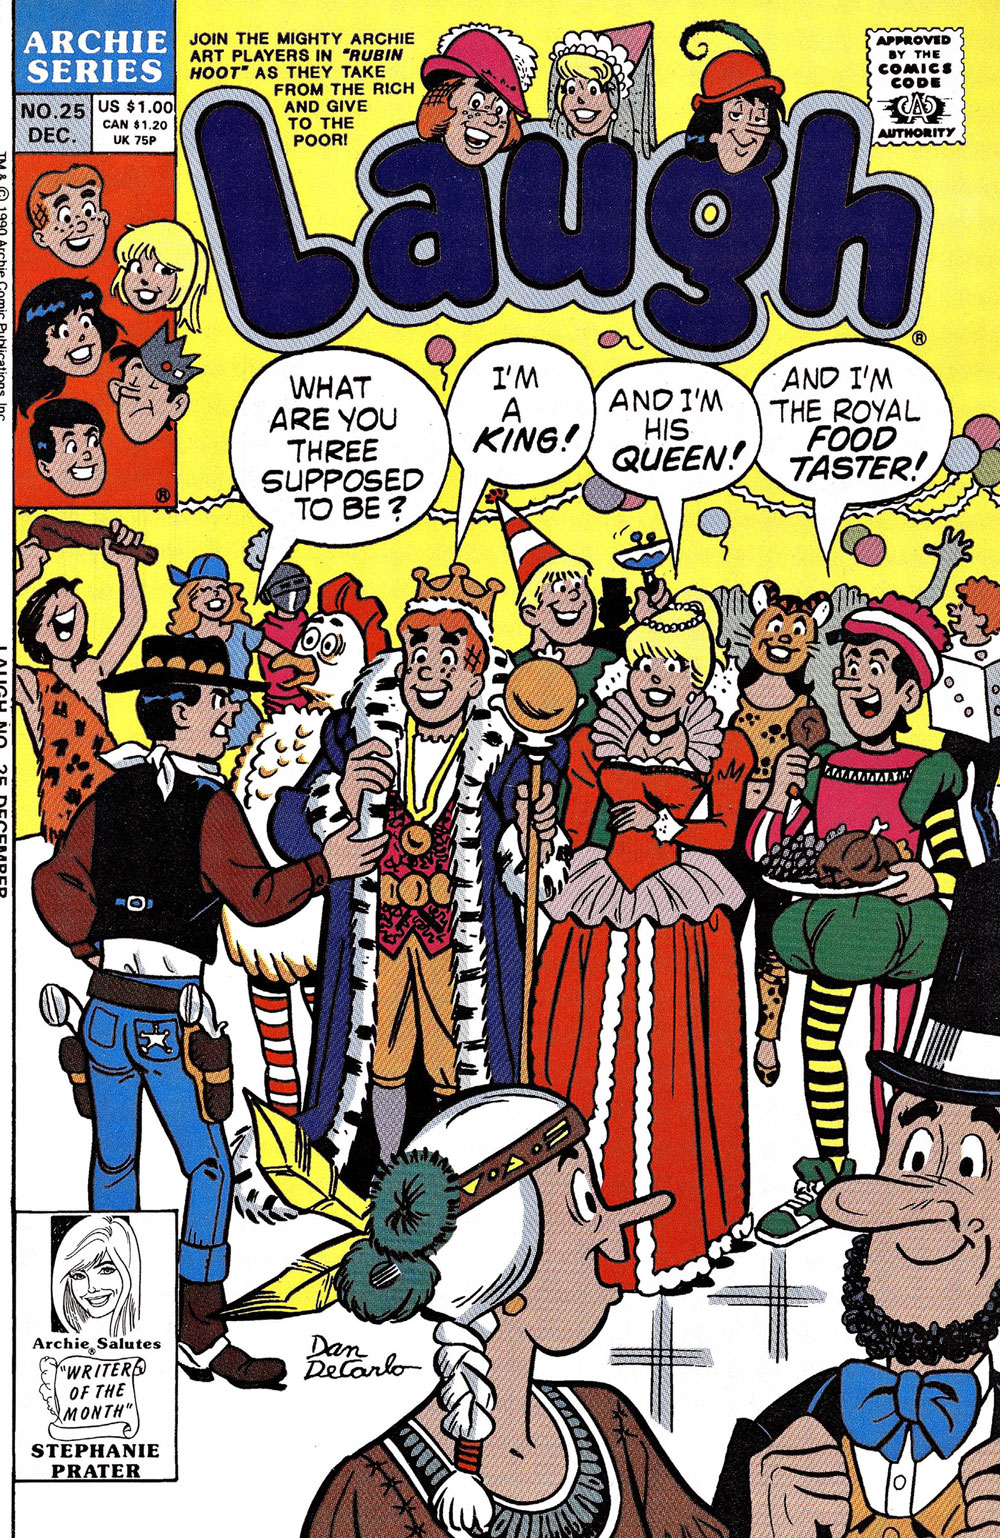 Archie and his friends are at a costume party. Reggie asks who they're supposed to be. Archie is a king, Betty is his queen, and Jughead, dressed as a court jester, says he's the royal food tester. He's eating a plate full of food.